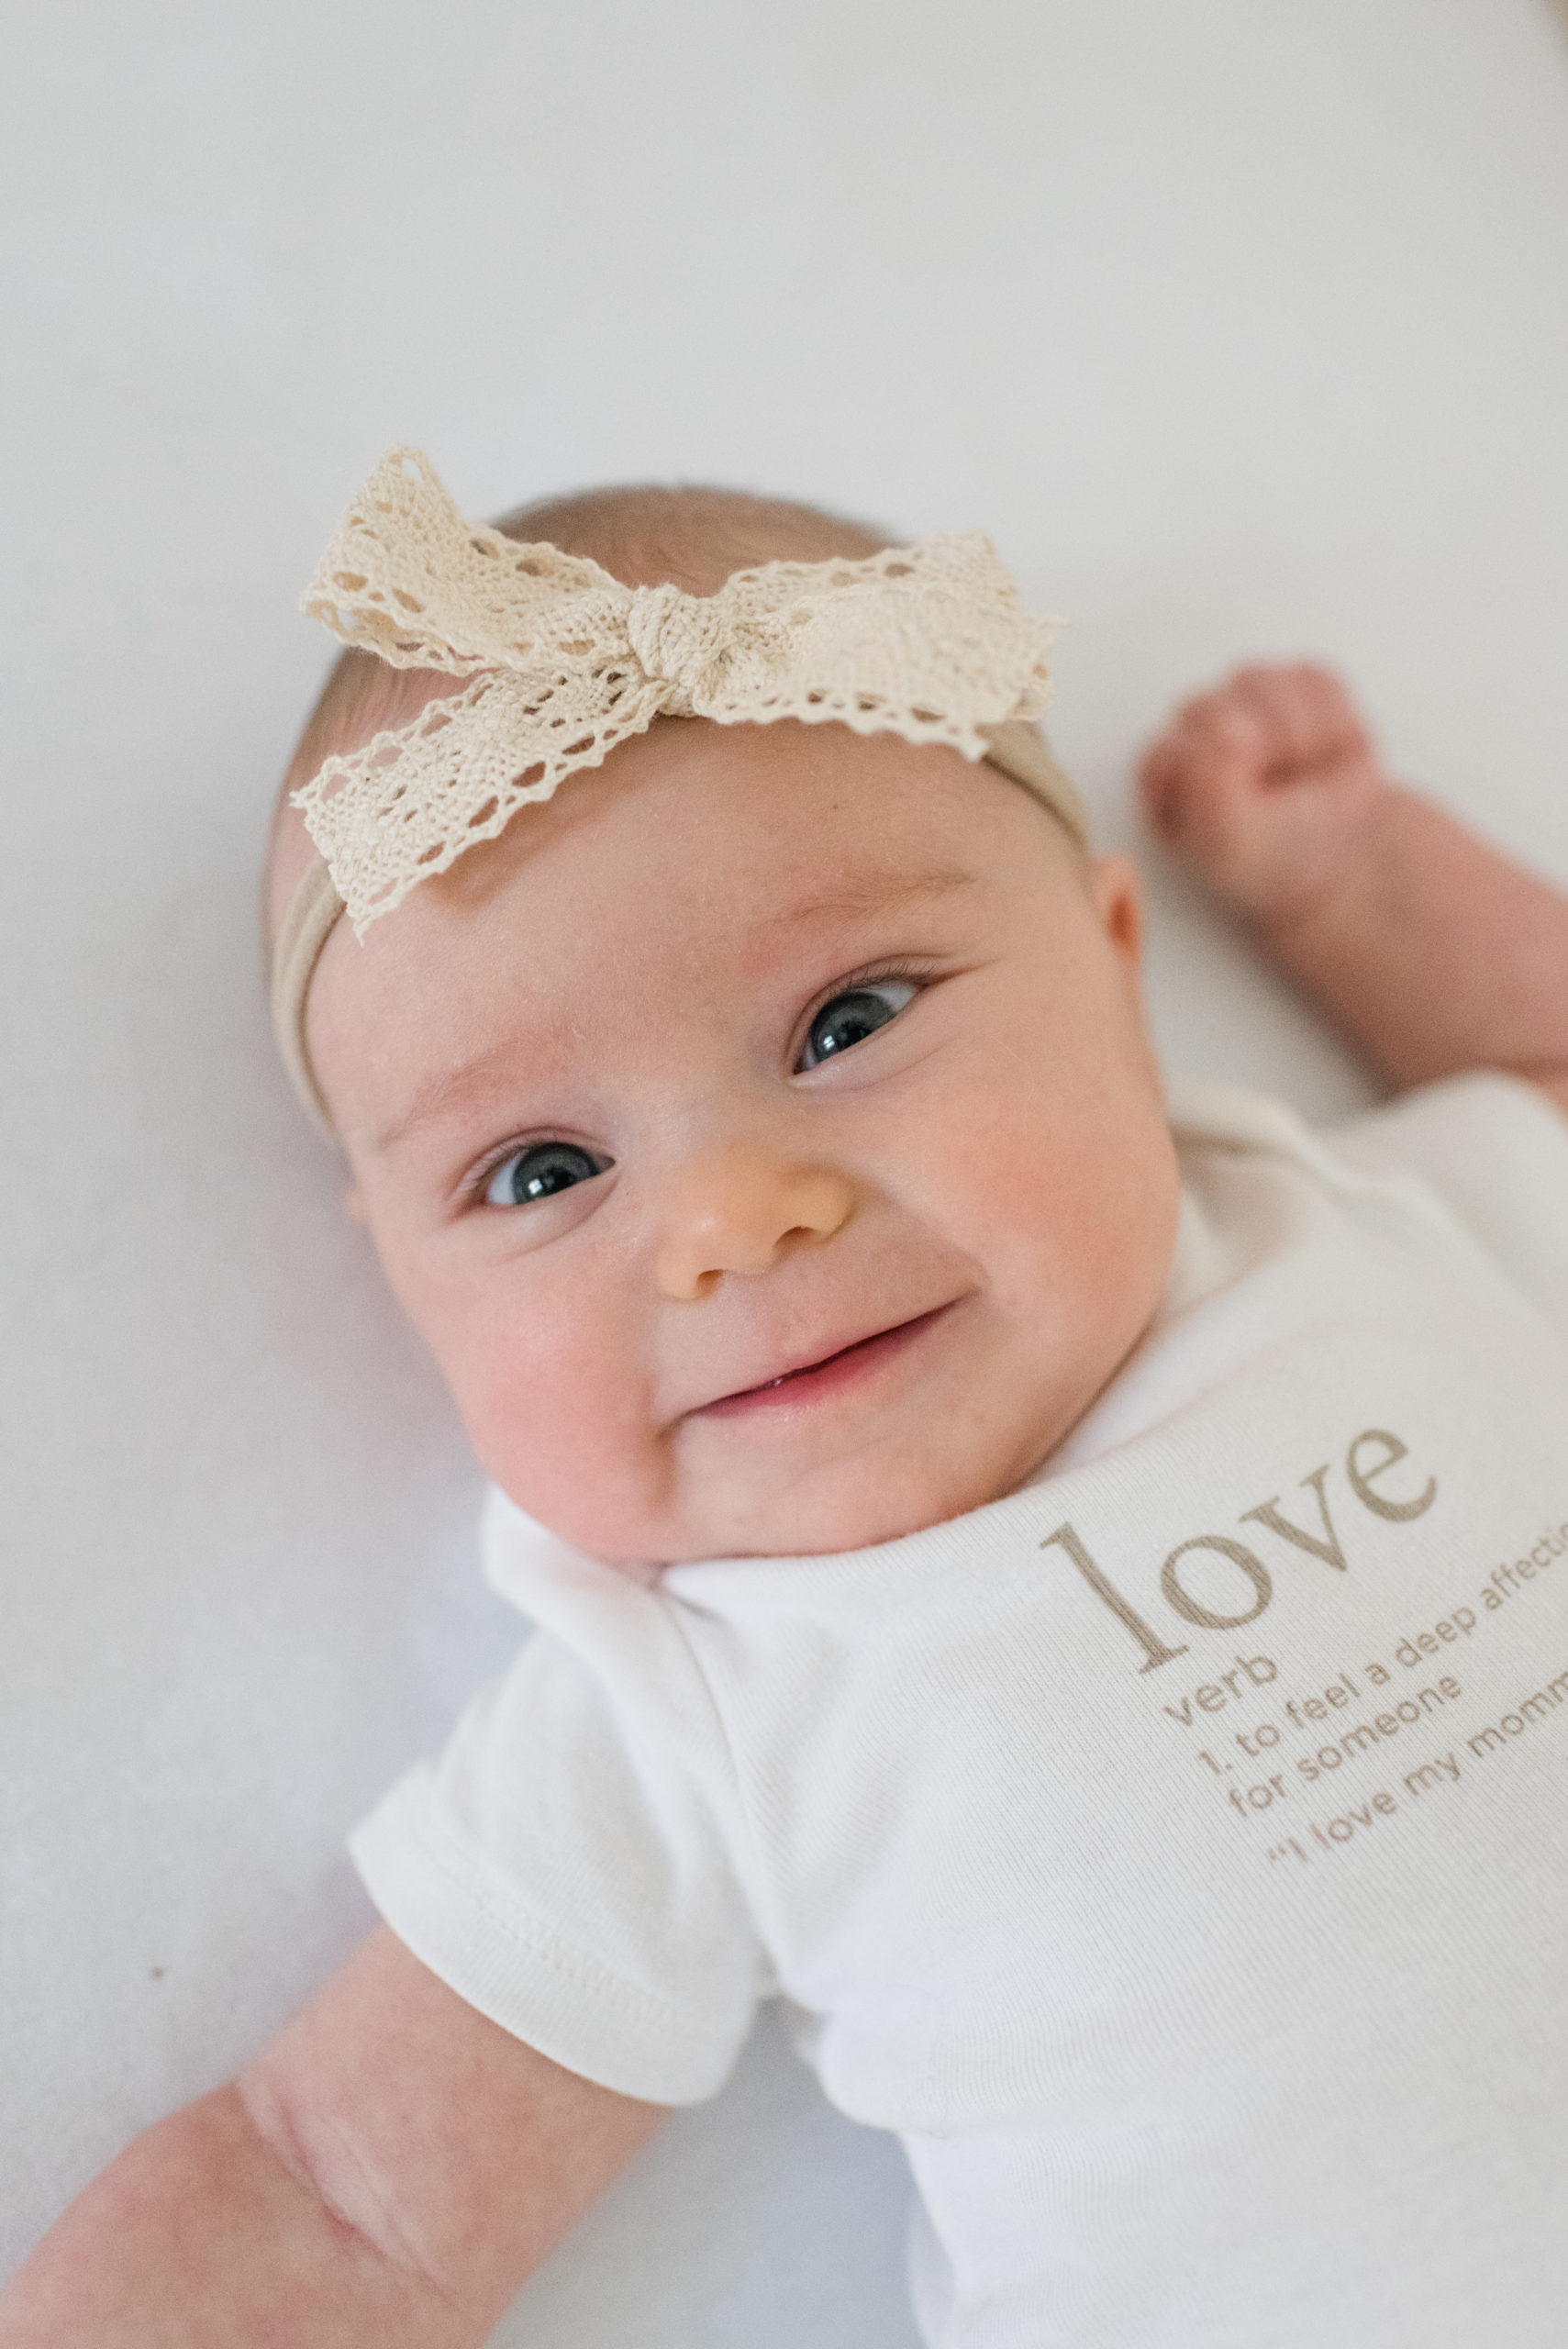 Olivia 2 Months Old - Sweet Williams Photography is a lifestyle, engagement, and wedding photographer serving the Nashville, Tennessee area and destination locations.